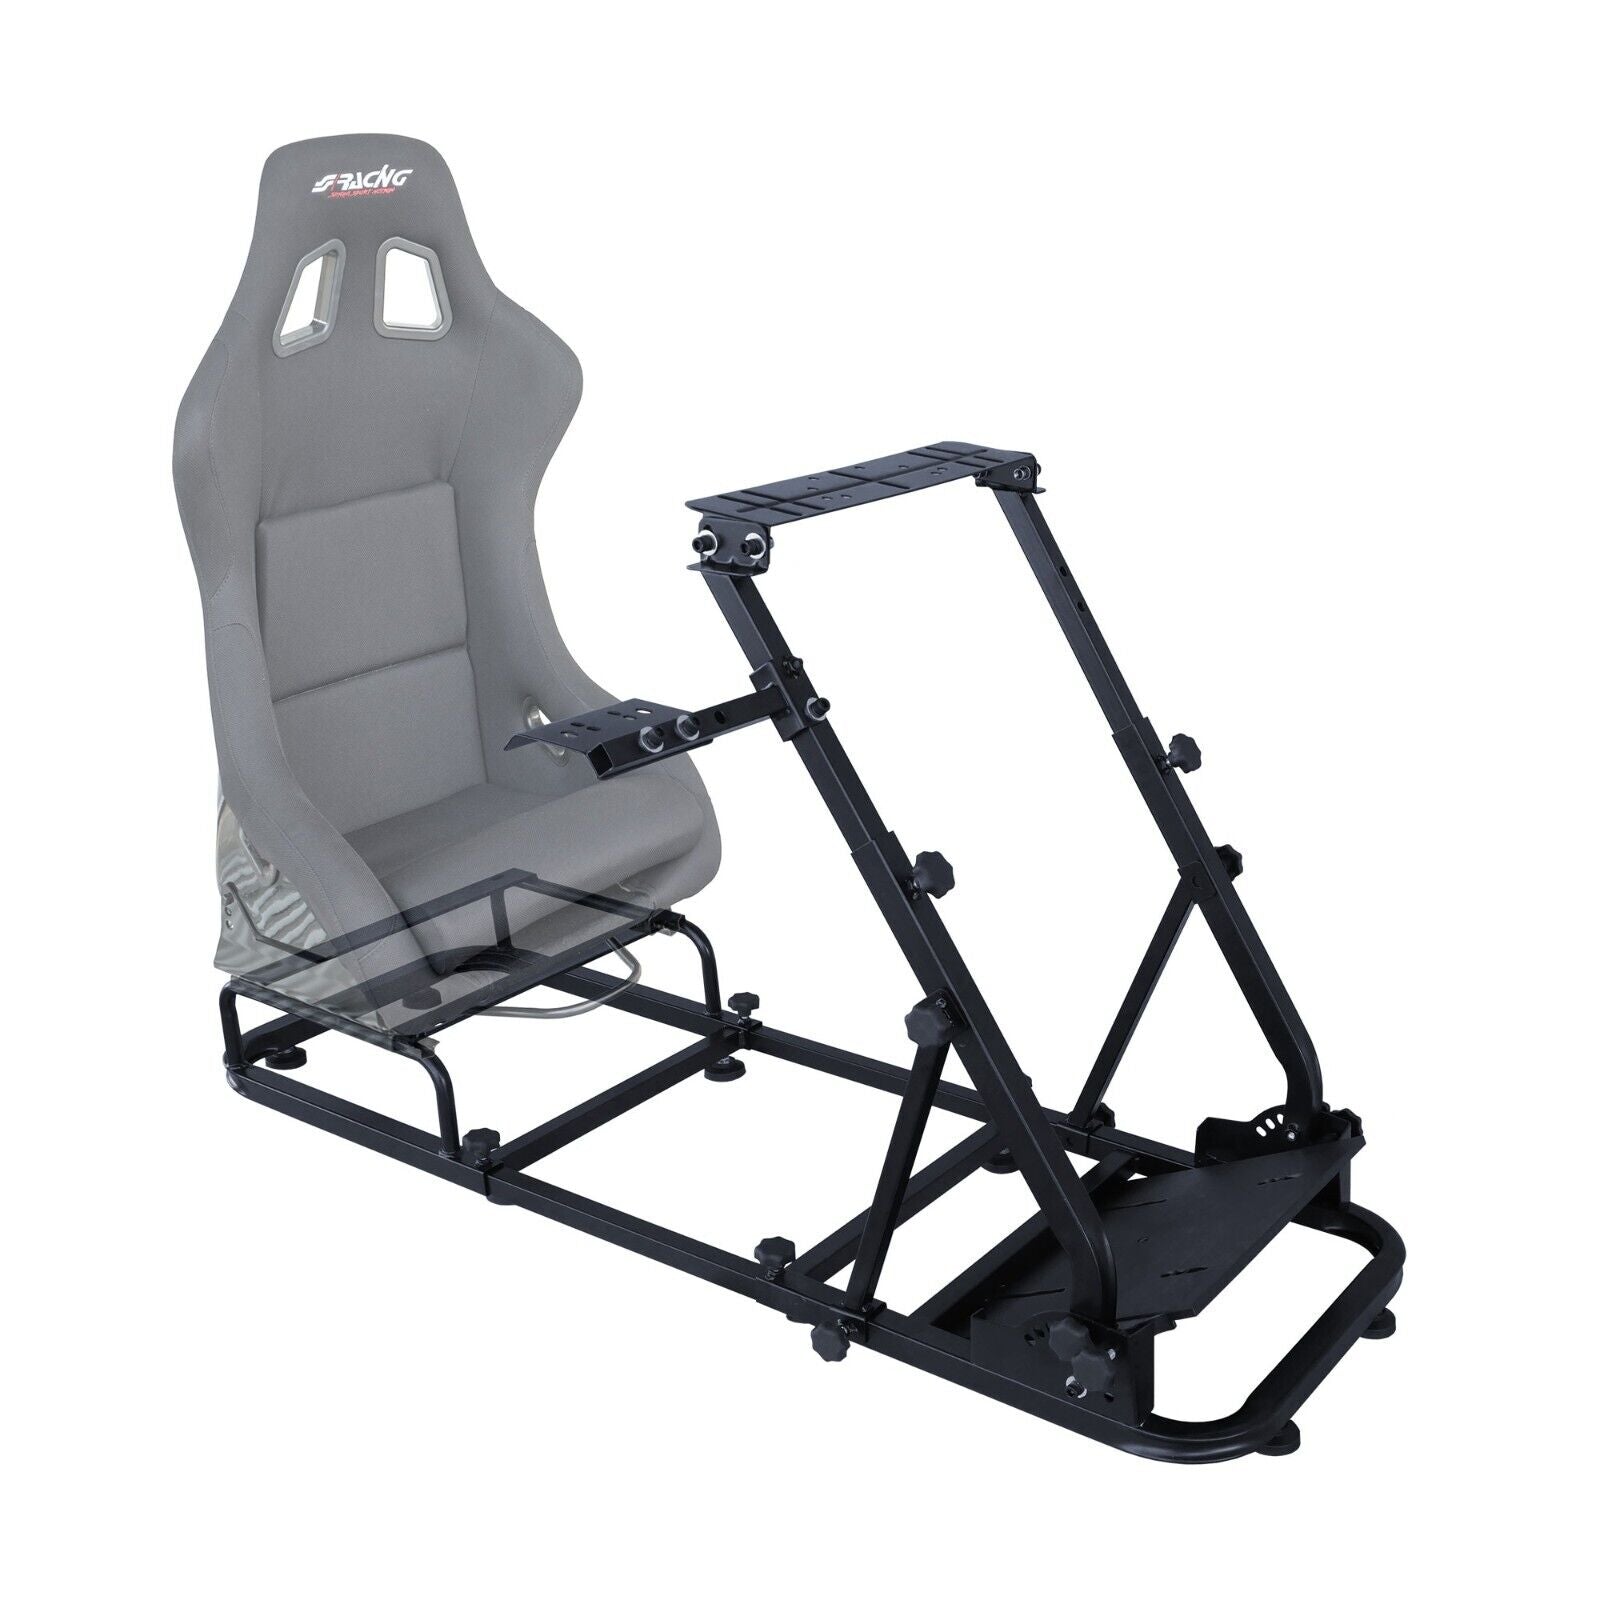 SR Driving Game Sim Racing Frame Rig for Screen Seat Wheel Pedals Xbox PS PC